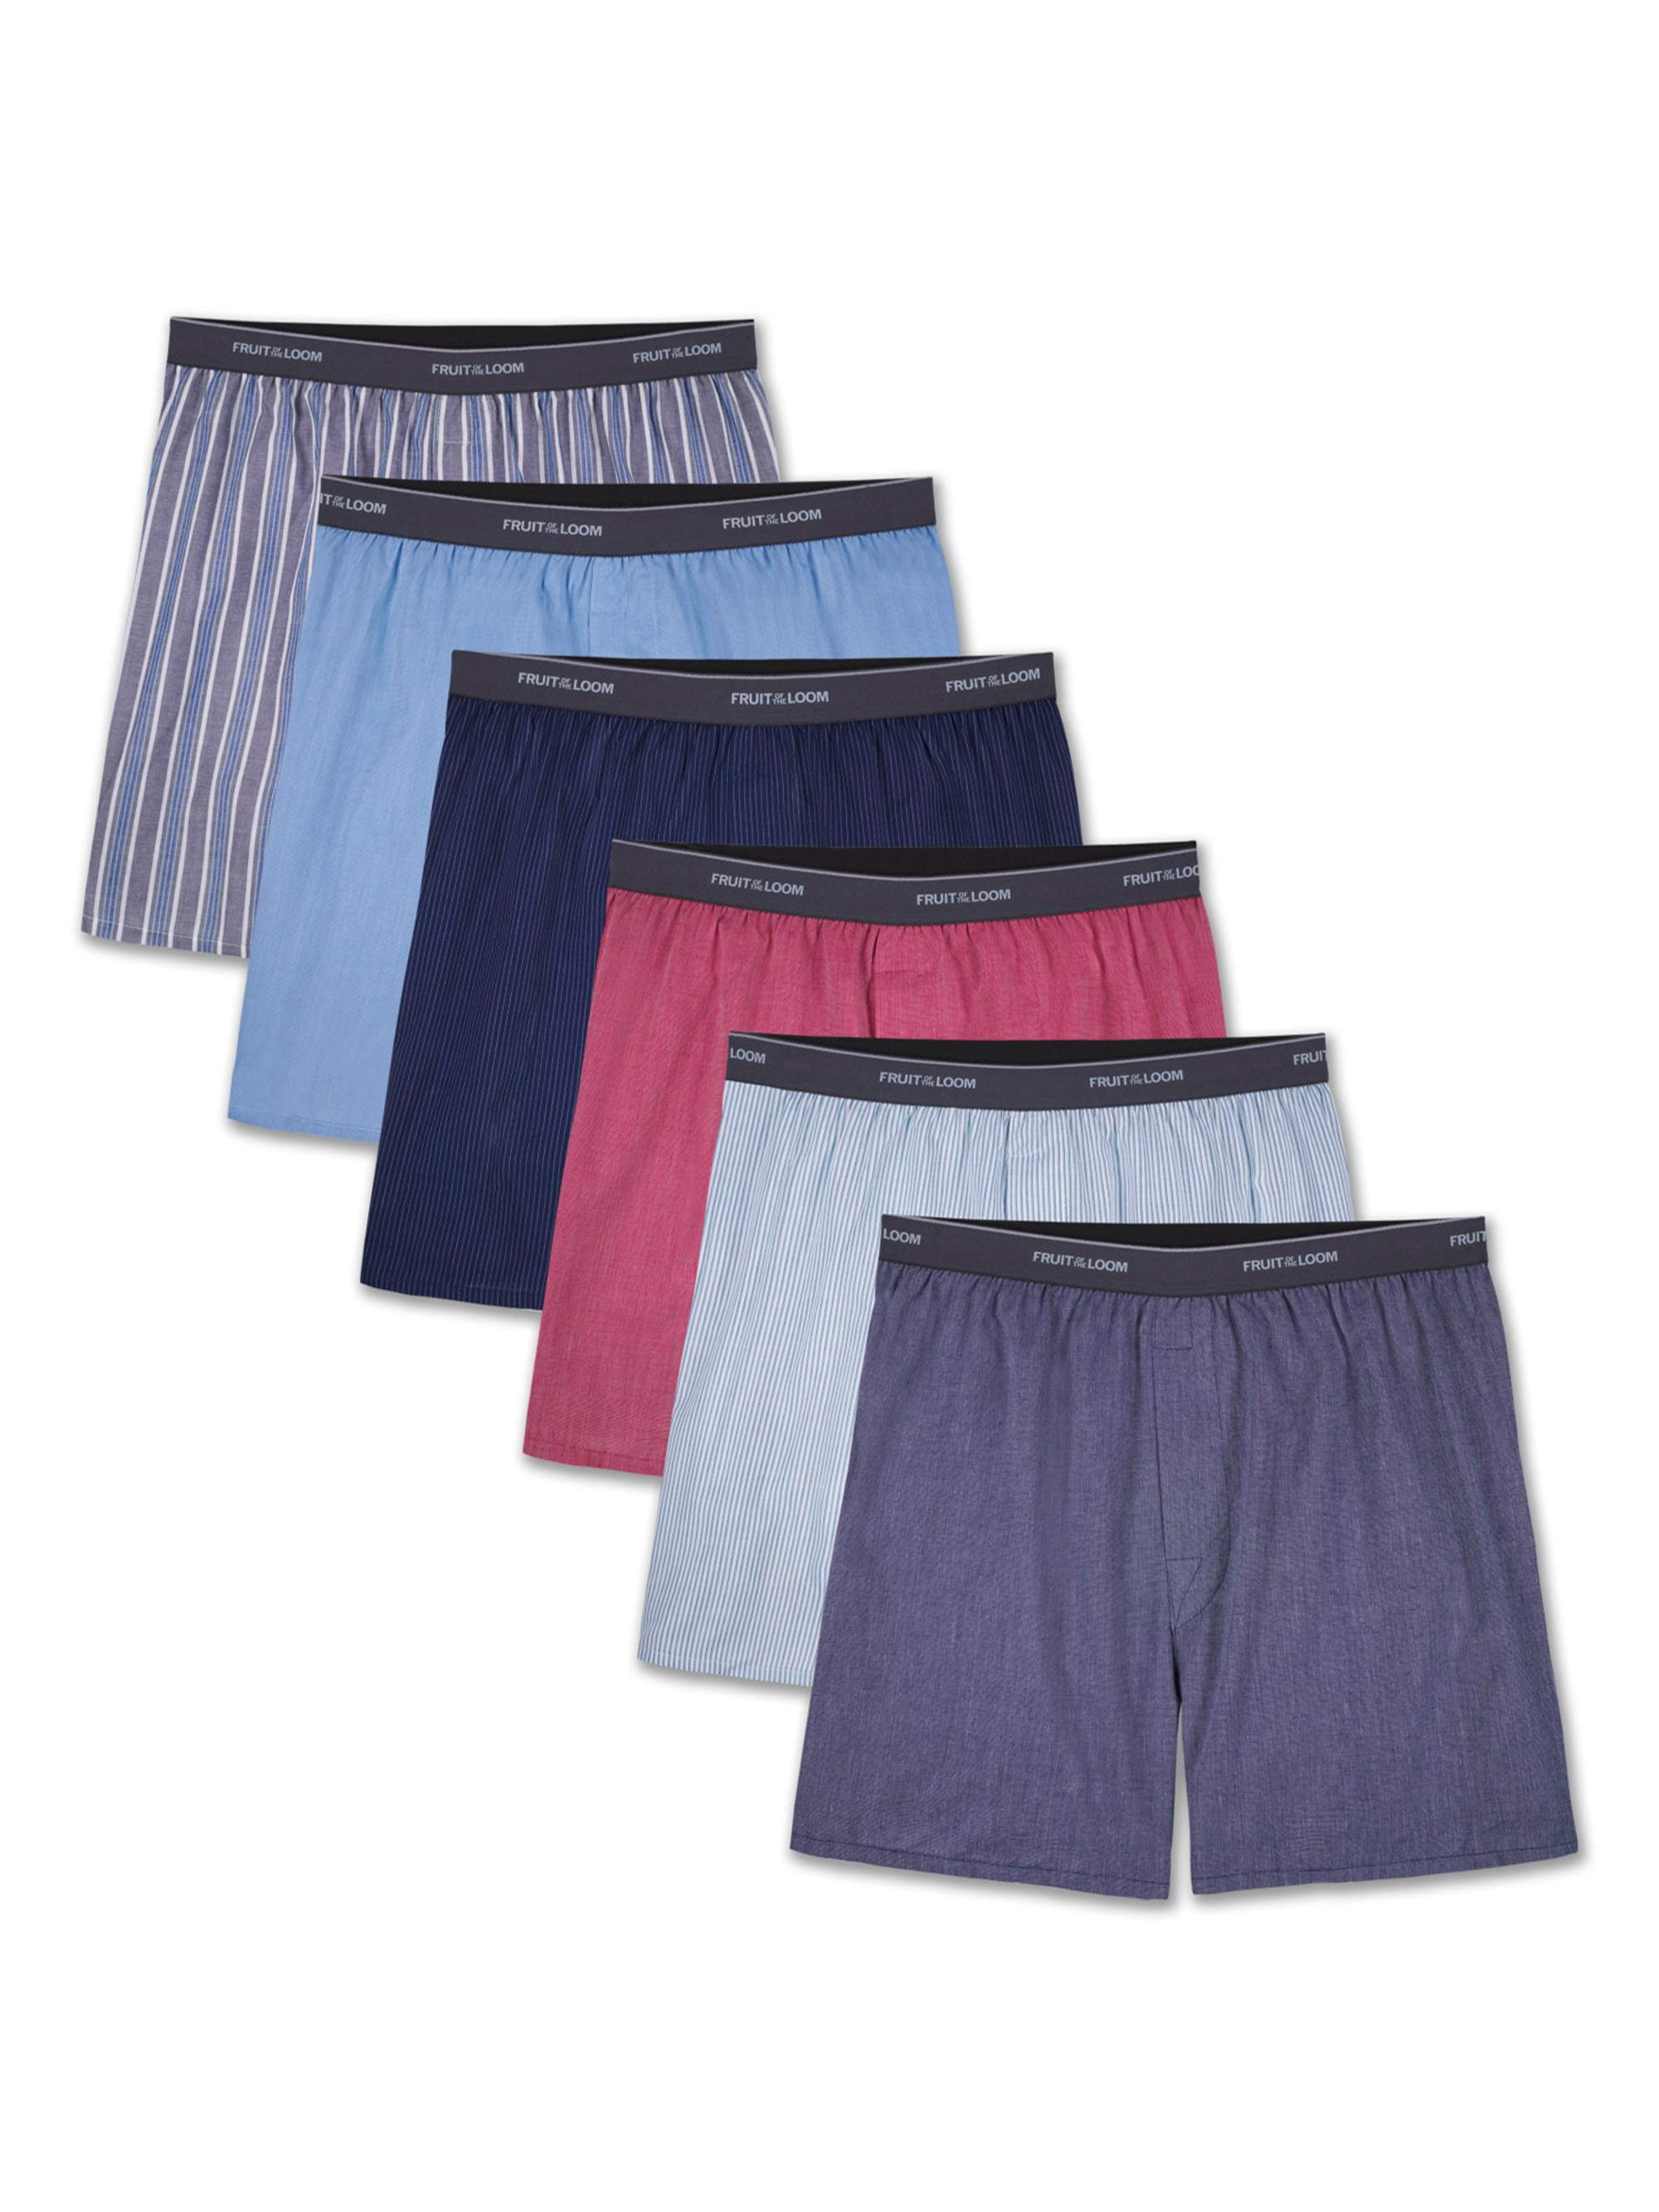 Fruit of the Loom Men's Woven Boxers, 6 Pack, Sizes S-3XL - Walmart.com